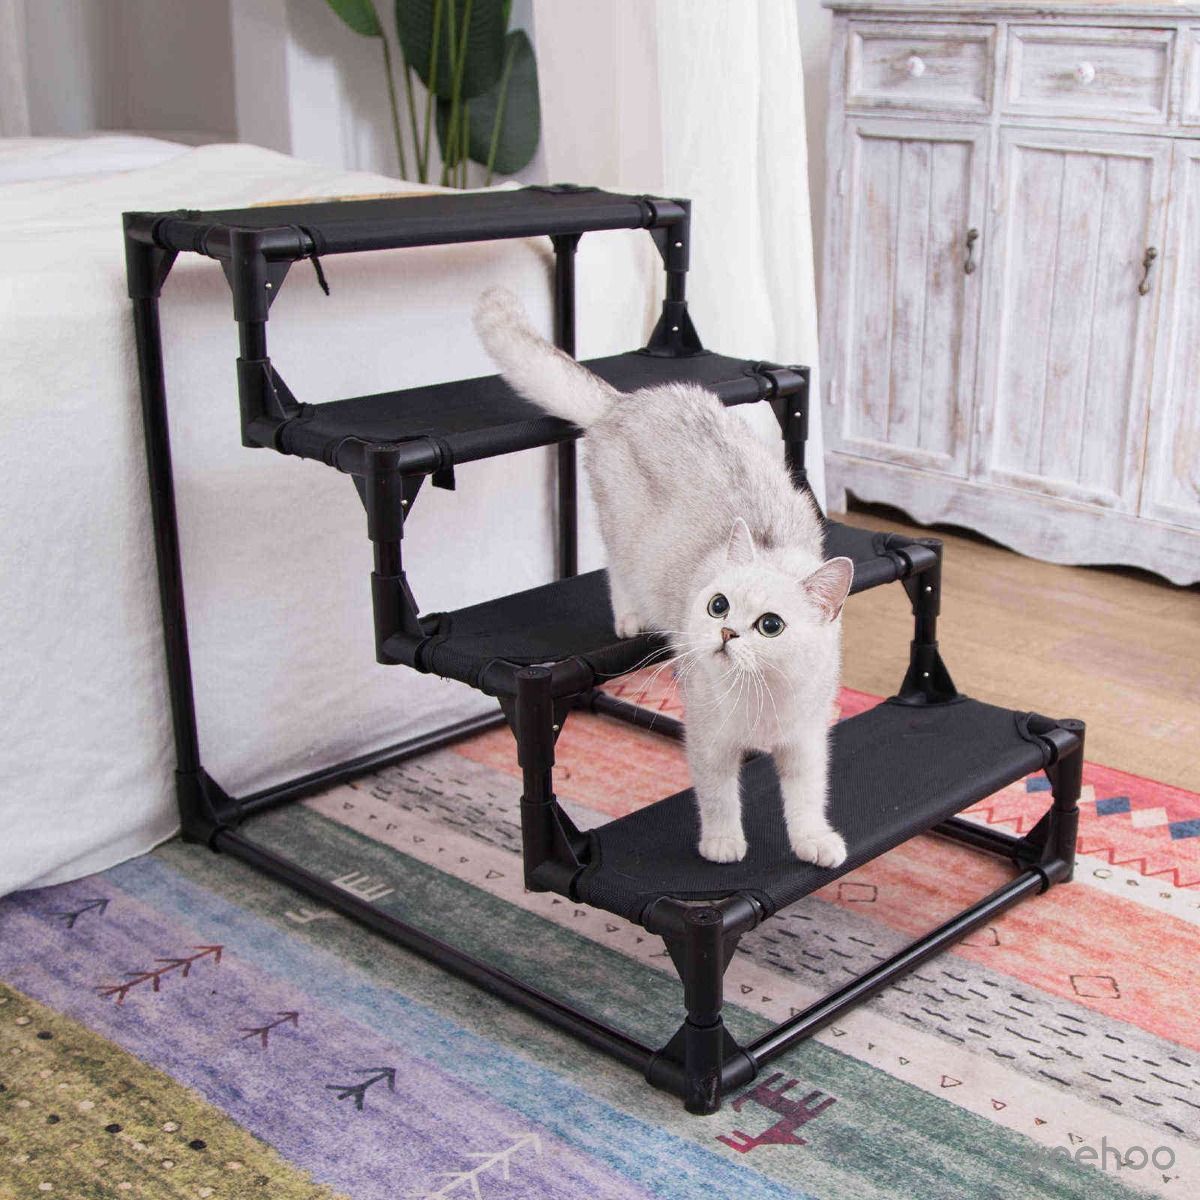 Doggie Puppy and Older Cats Step for High Bed Couch Veehoo Sturdy Pet Steps Pet Stairs for Small Dogs and Cats 